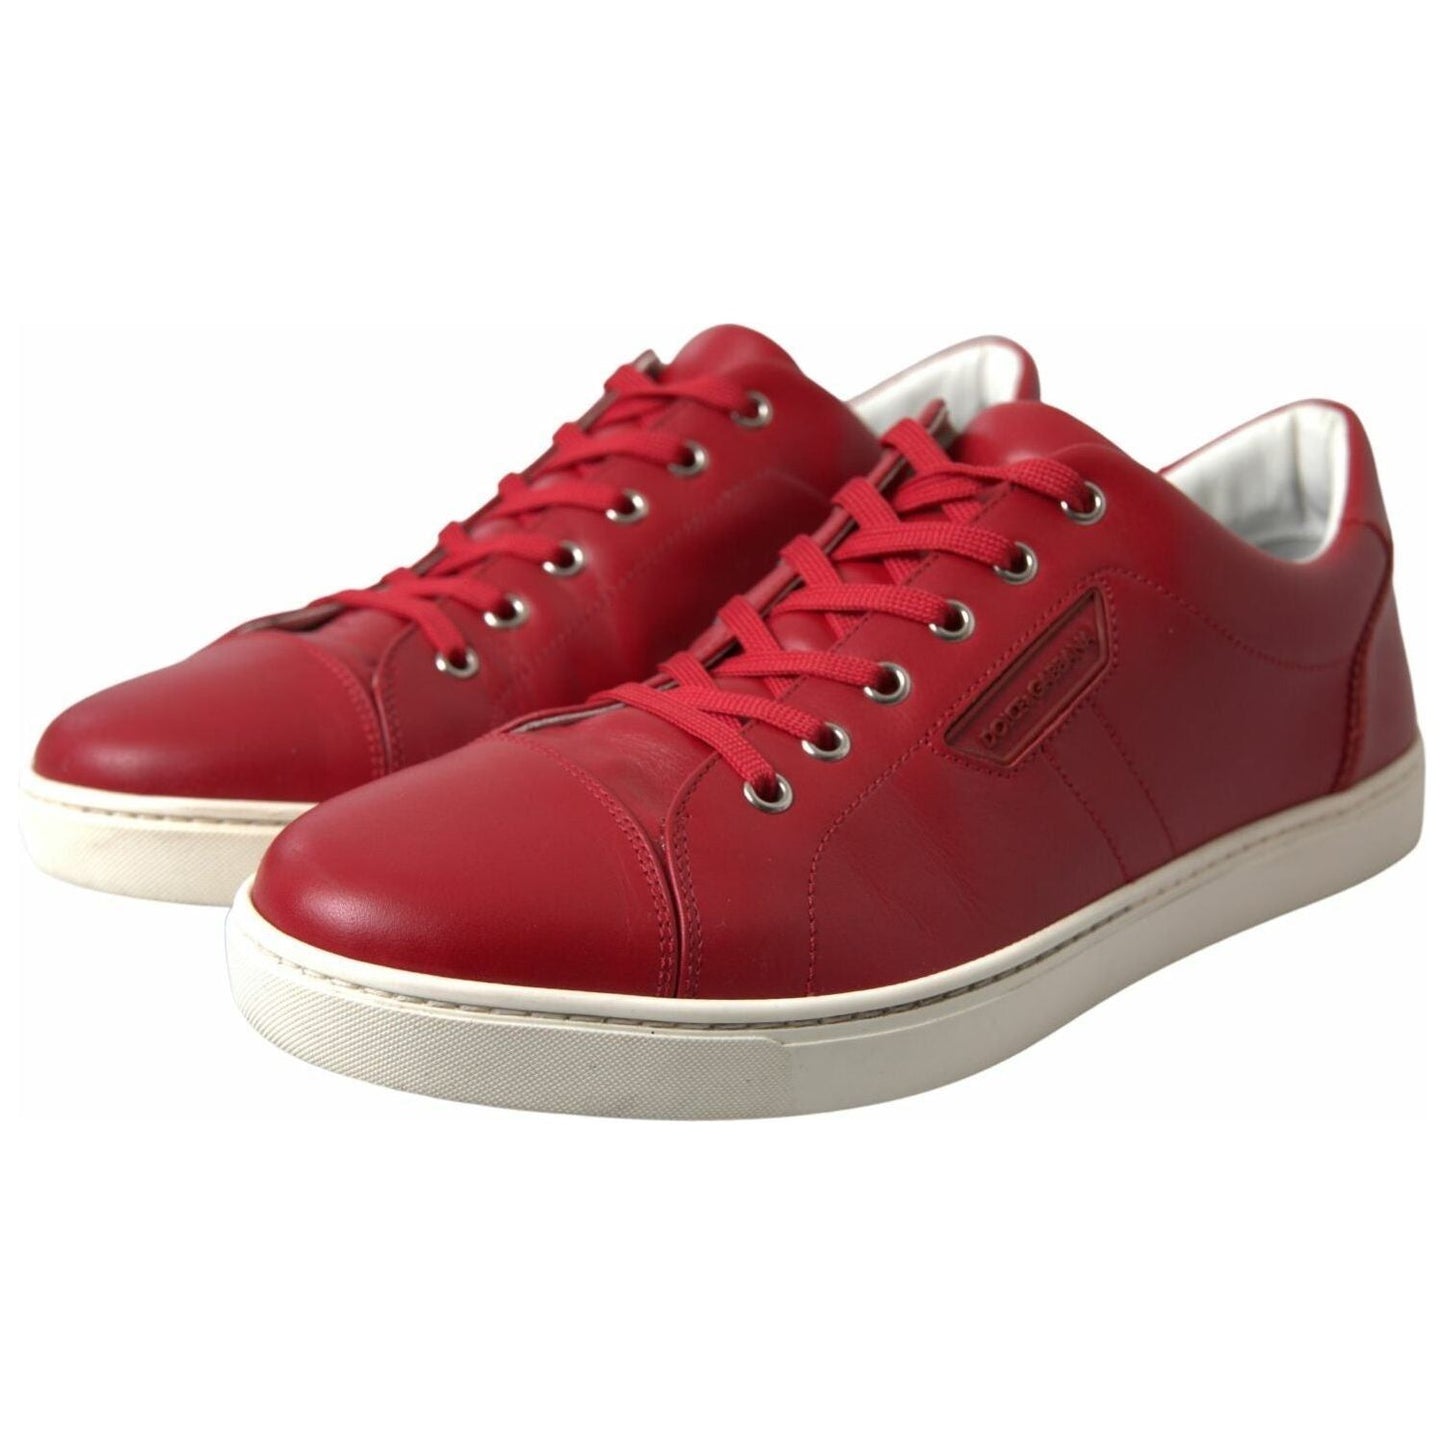 Dolce & Gabbana Elegant Red Leather Low Top Sneakers shoes-red-portofino-leather-low-top-mens-sneakers 5-scaled-ddbb5318-c63.jpg